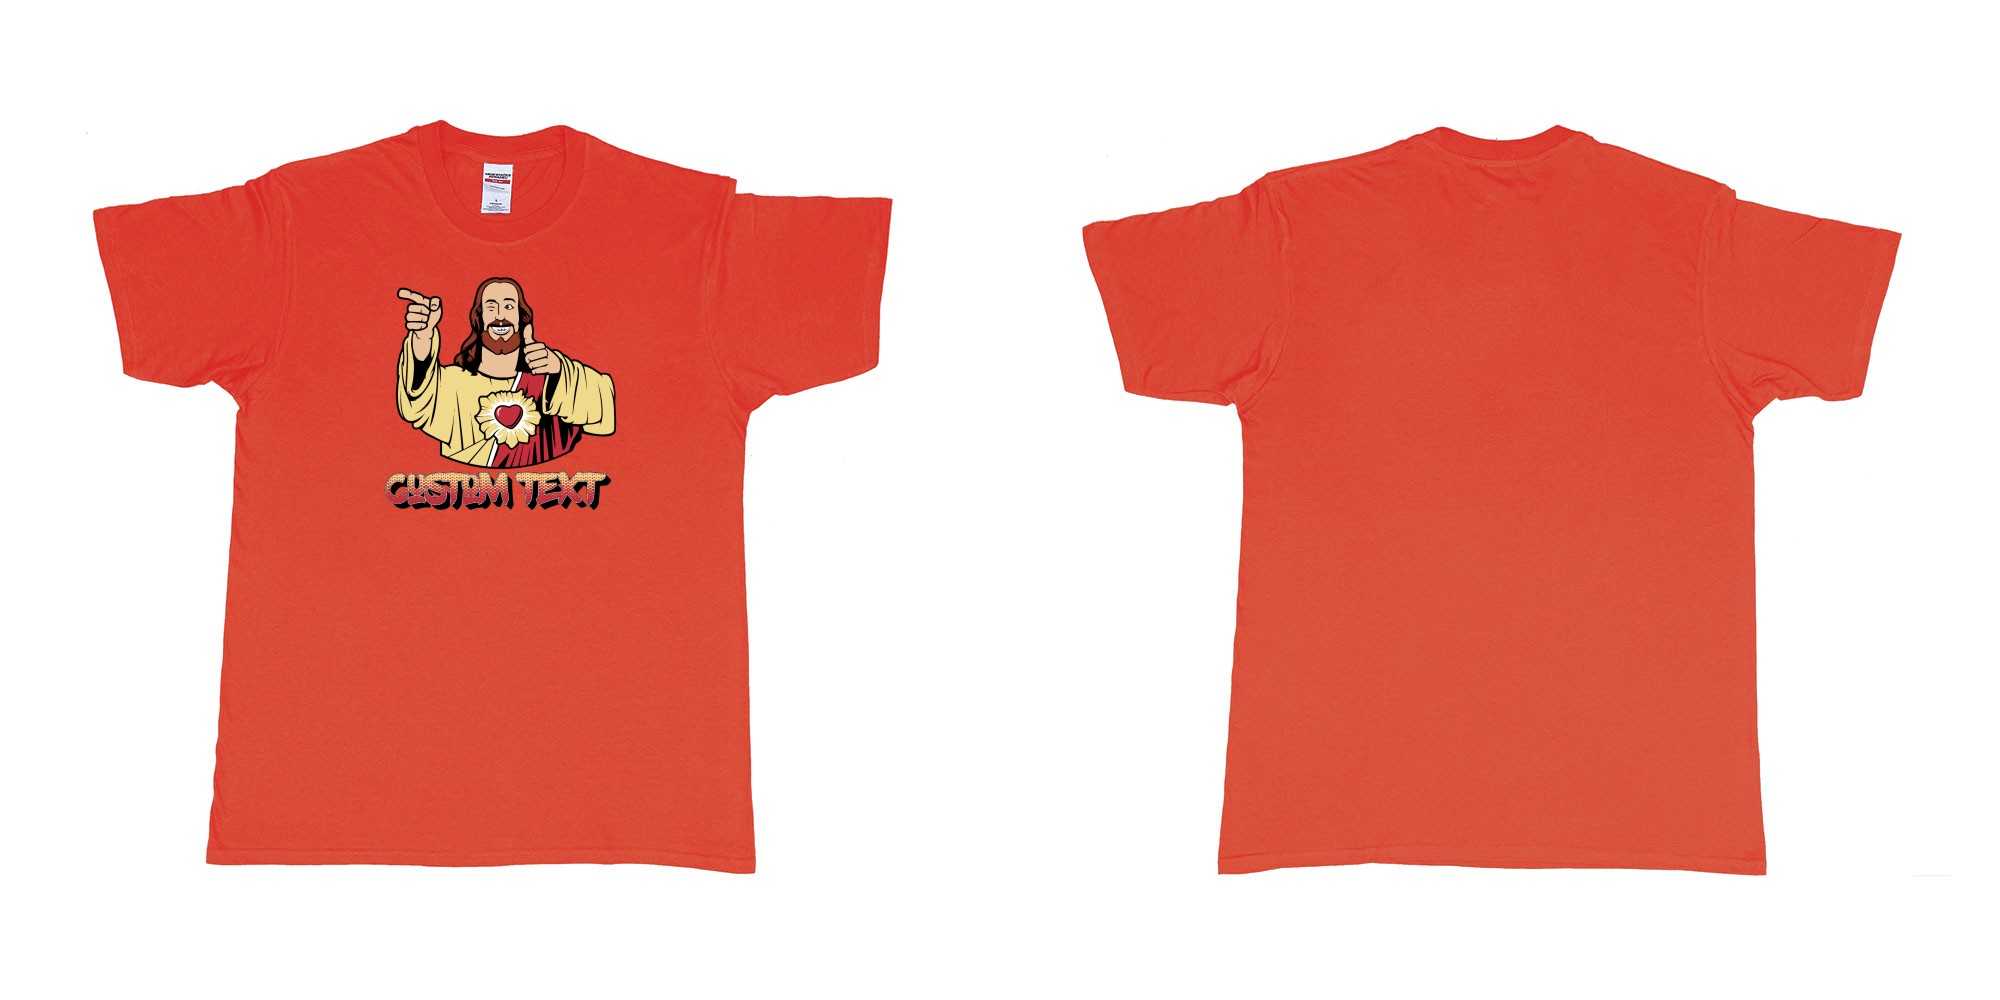 Custom tshirt design buddy christ custom text in fabric color red choice your own text made in Bali by The Pirate Way